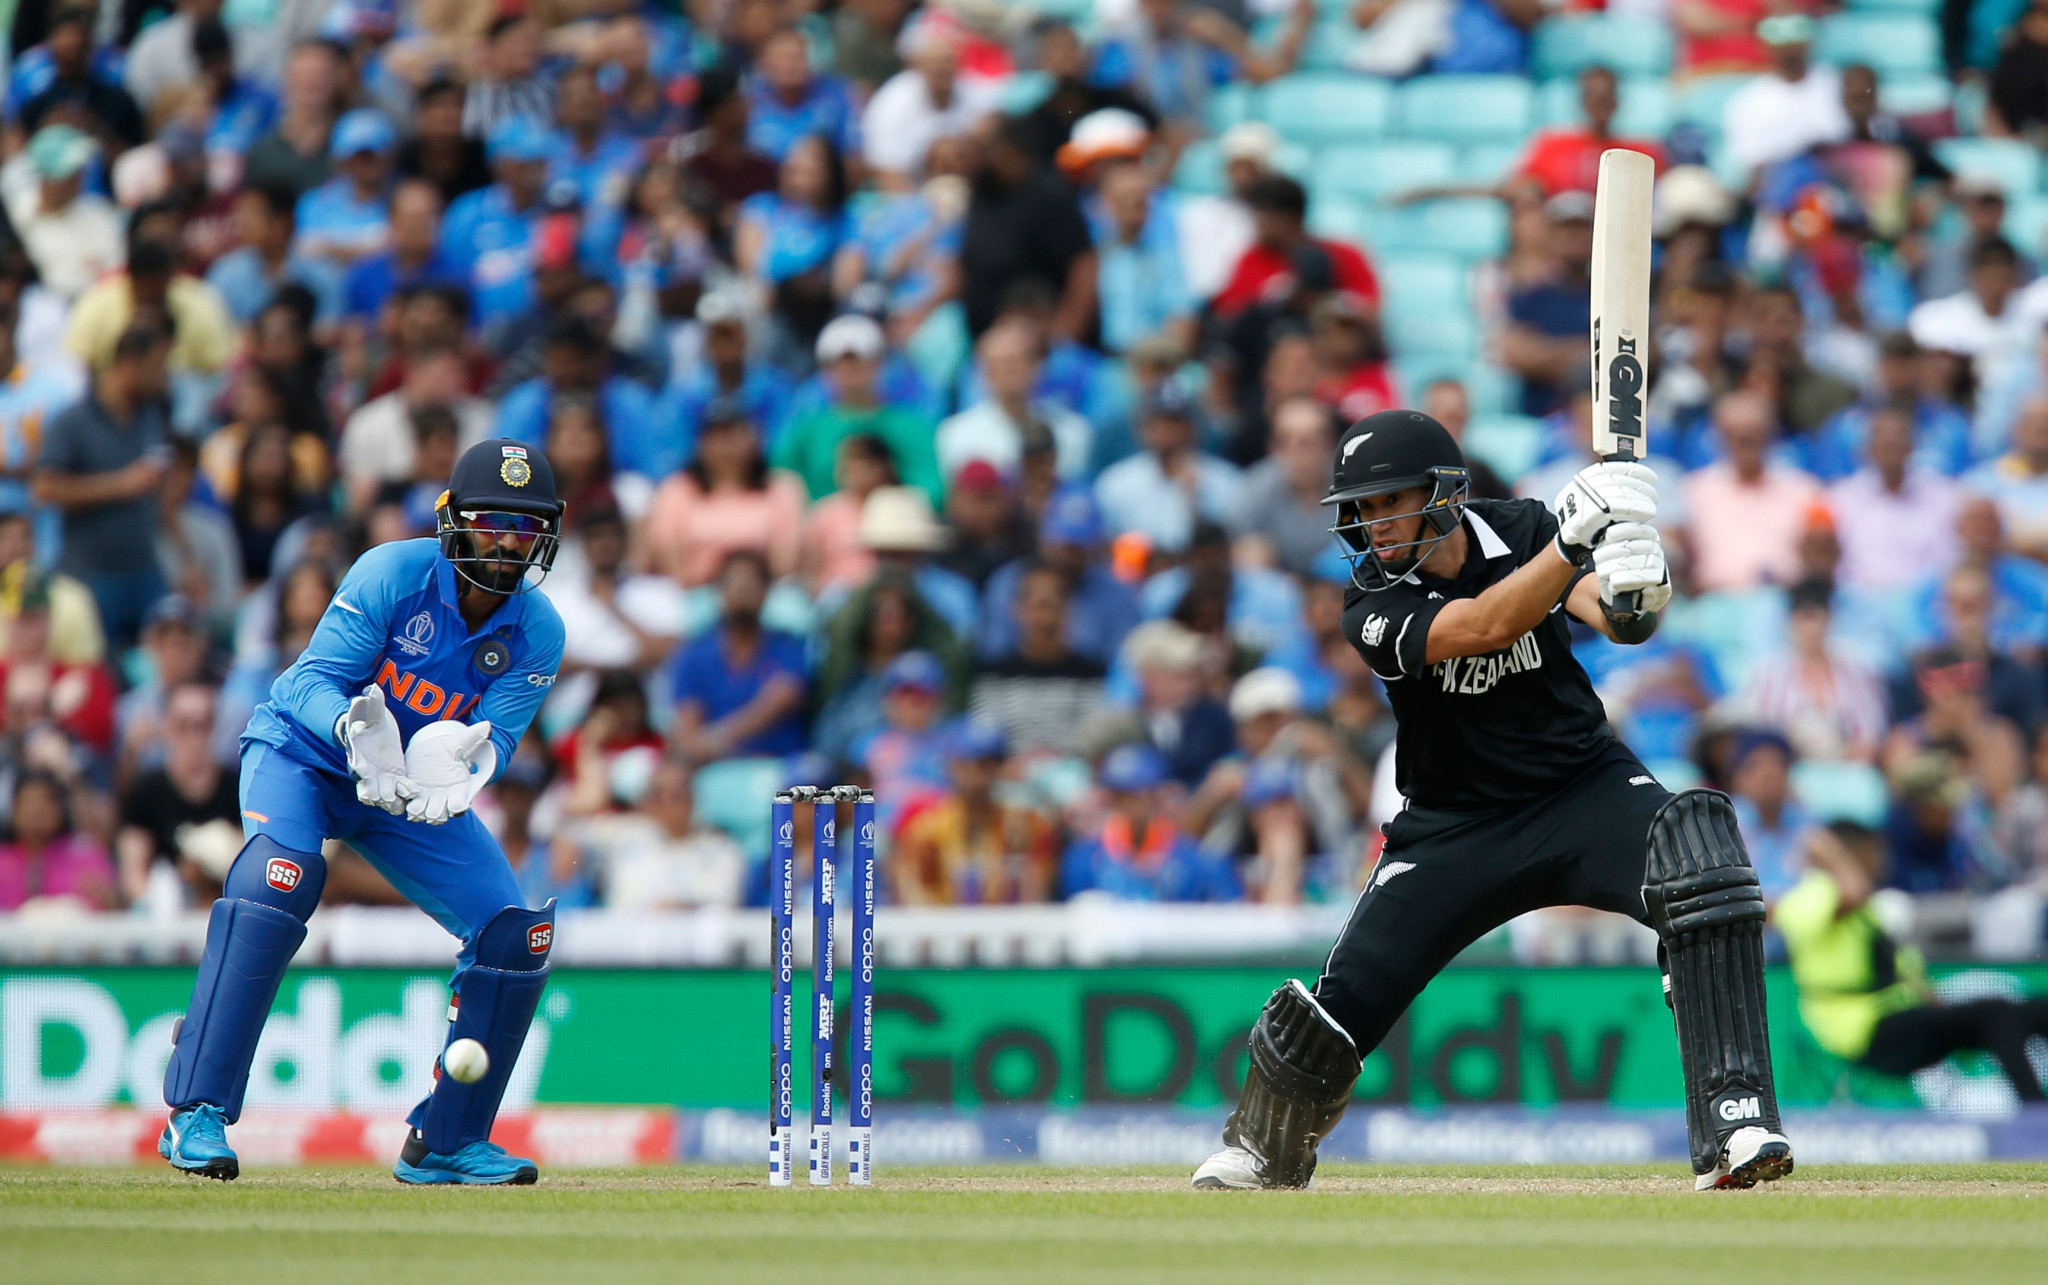 New Zealand thrash India in ICC Cricket World Cup warm-up game